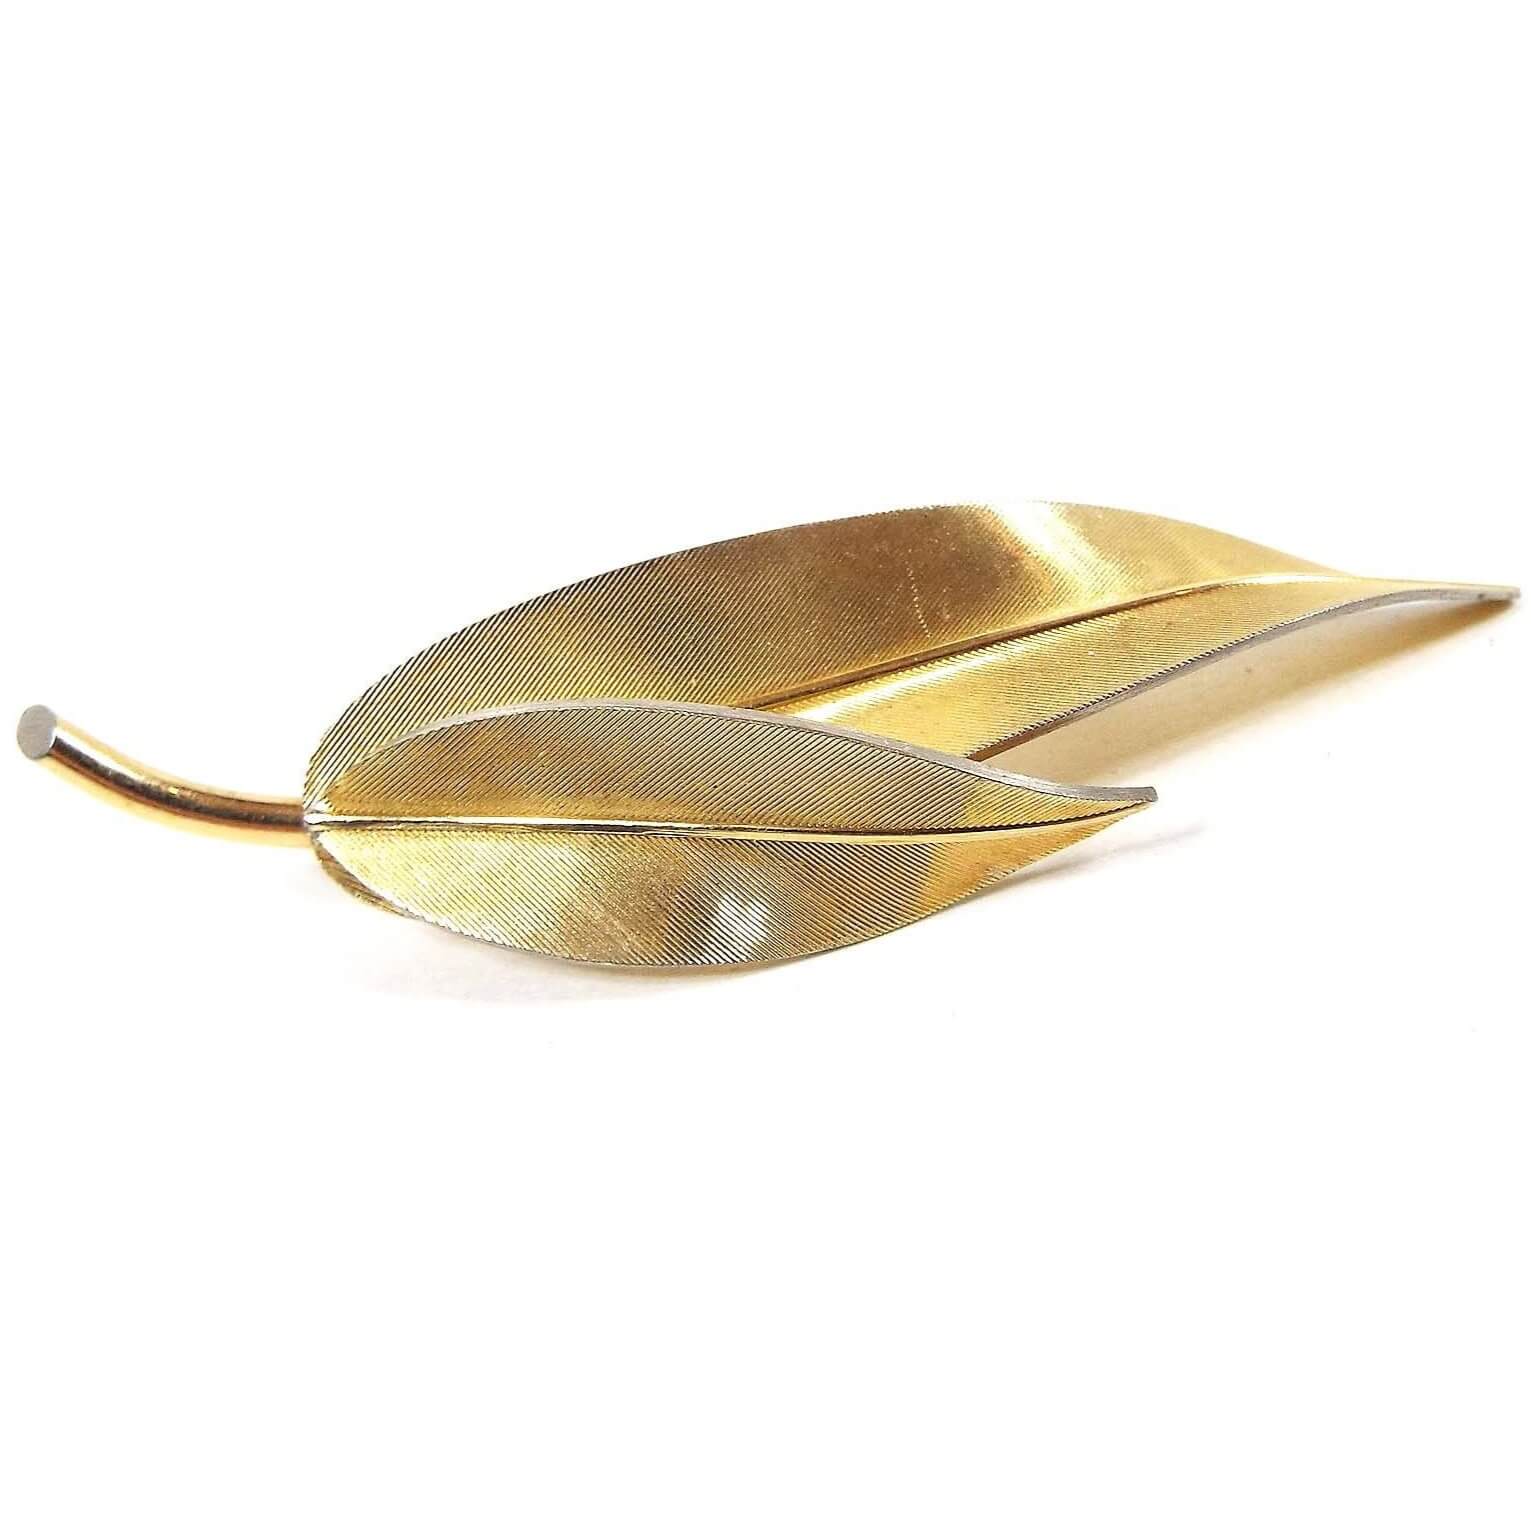 Front view of the Mid Century vintage Krementz leaf brooch pin. It is gold tone in color with a textured fine line front. There is a leaf stem holding two elongated leaves that curve at the end.